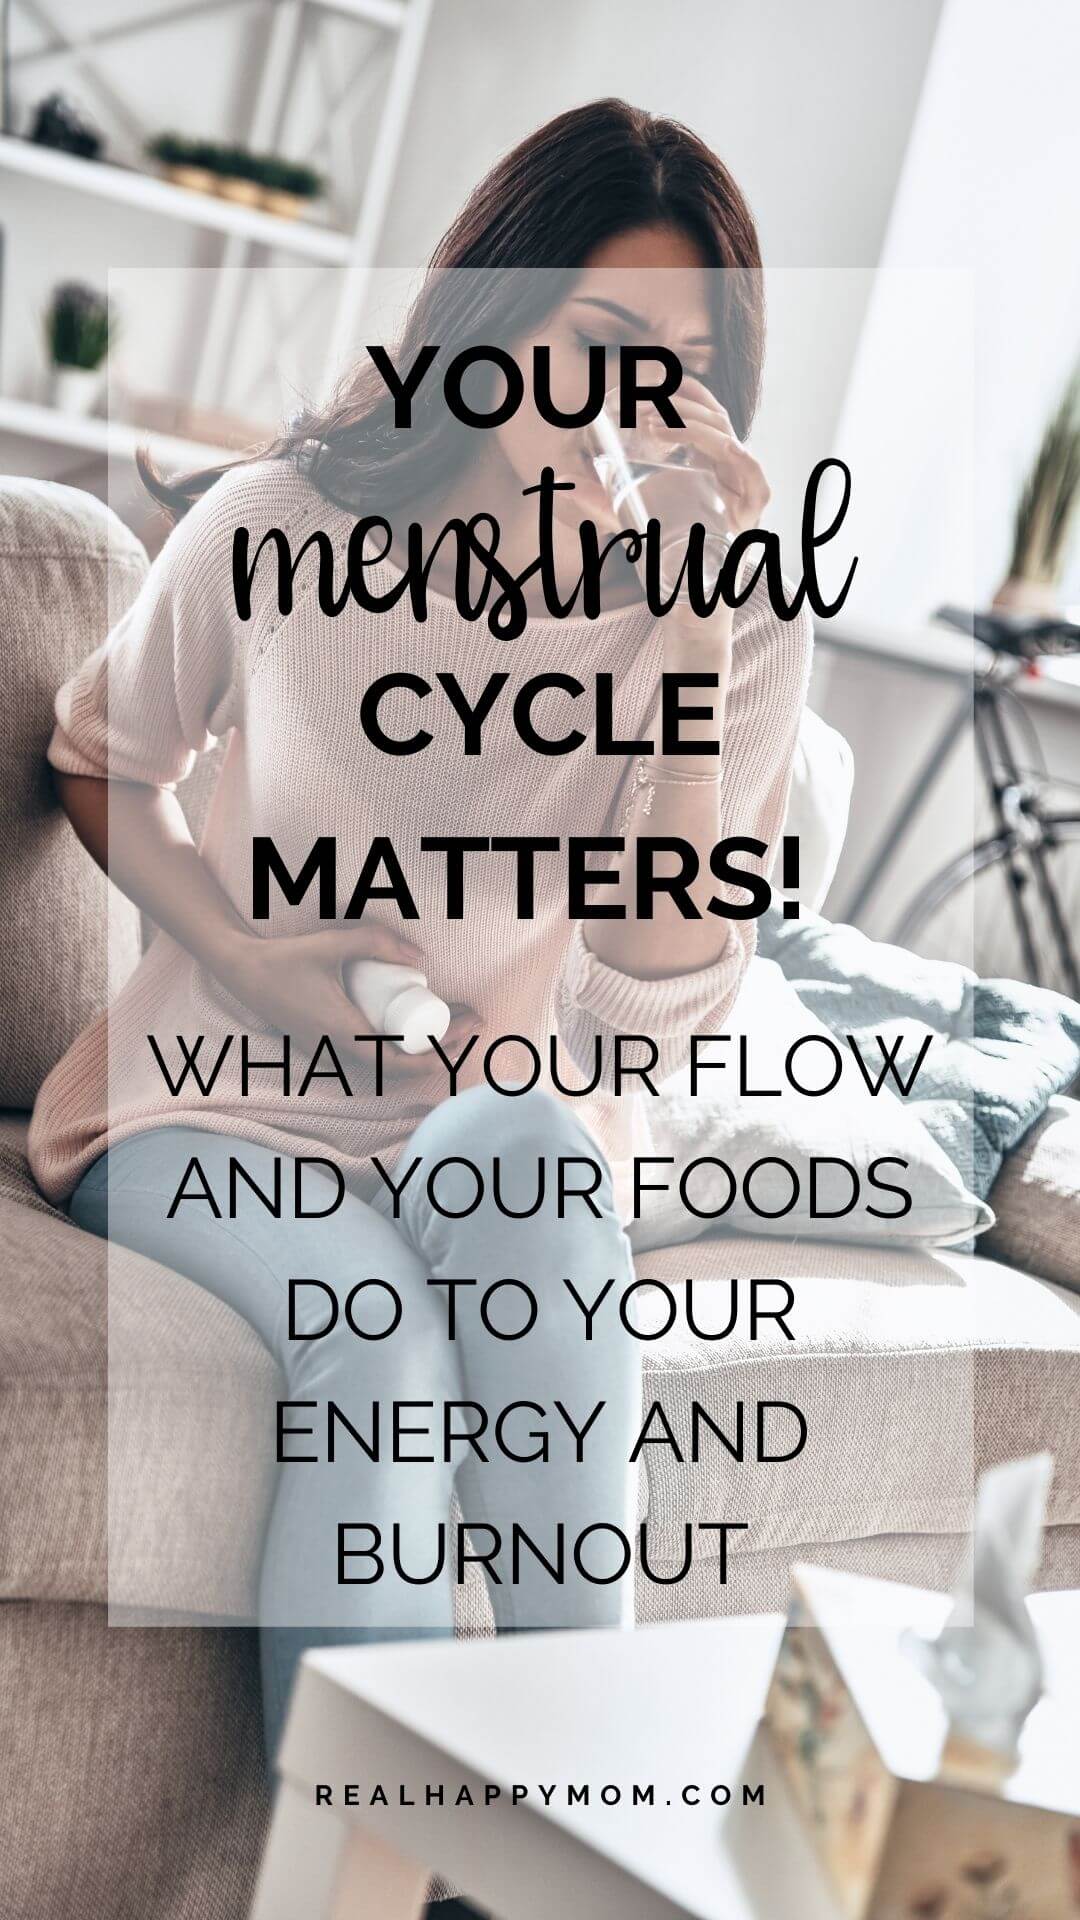 Your Menstrual Cycle Matters! What Your Flow and Your Foods Do to Your Energy and Burnout